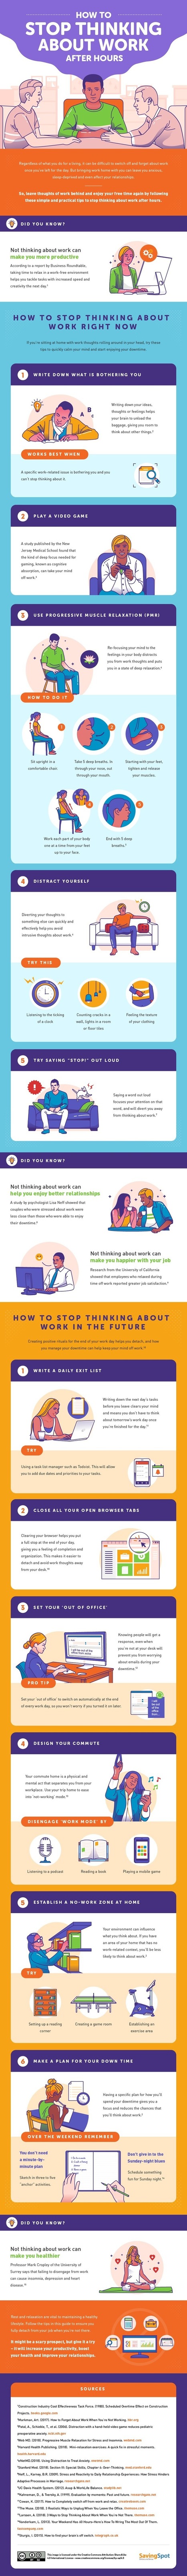 How to switch off your work brain after hours (infographic) via @digitaliworld | Learning with Technology | Scoop.it